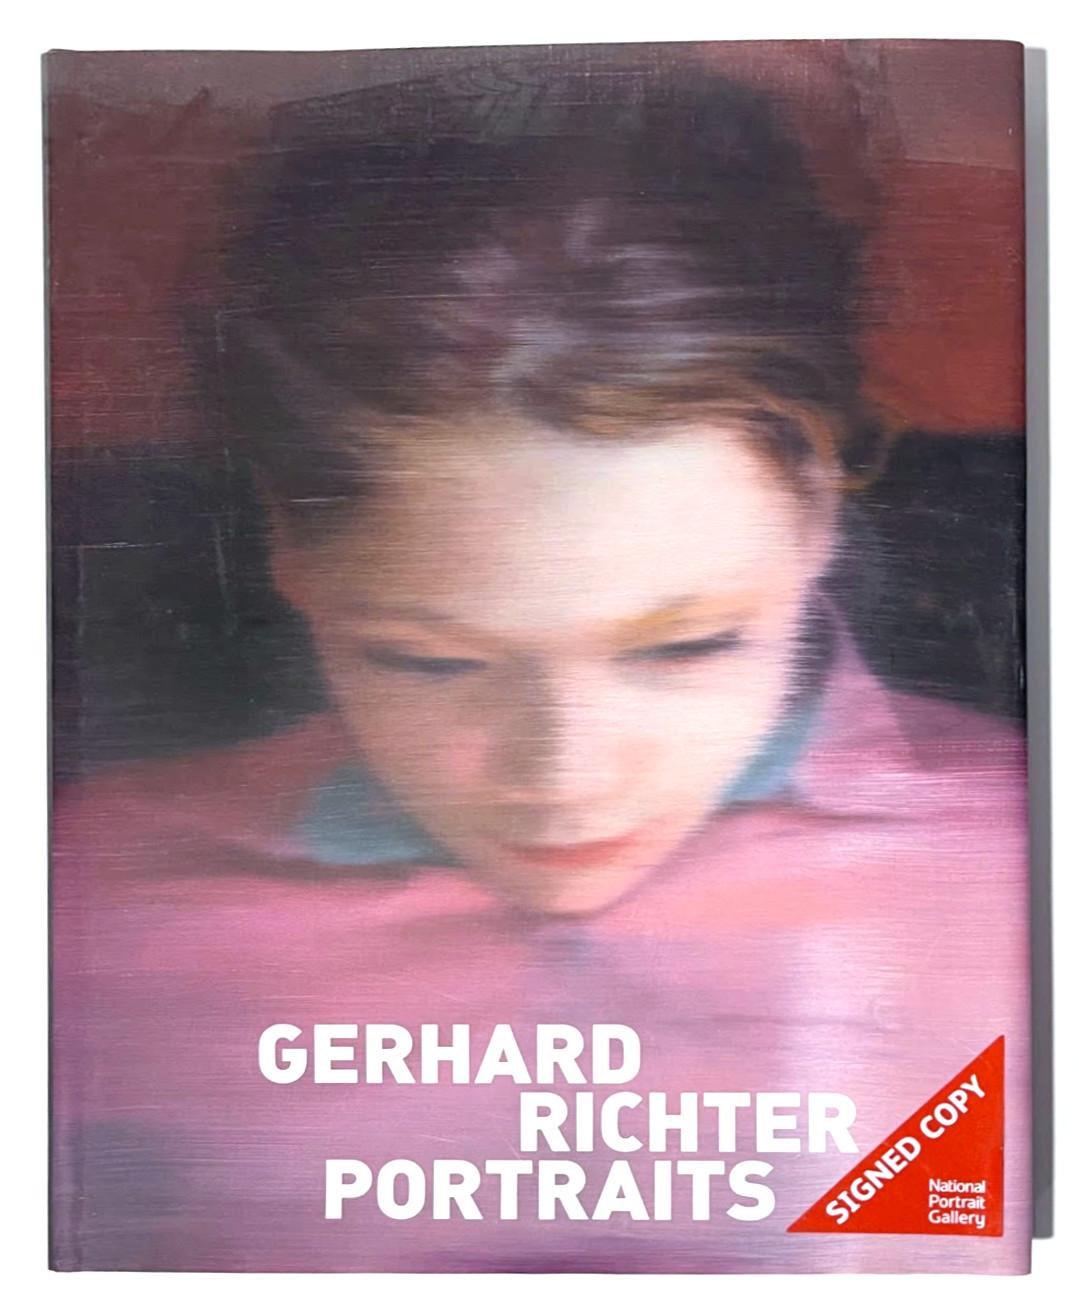 Gerhard Richter
GERHARD RICHTER PORTRAITS (official hand signed copy), 2009
Hardback monograph with dust jacket (official hand signed copy)
Hand signed by Gerhard Richter on the title page; bears red band on the front jacket corner noting that it is